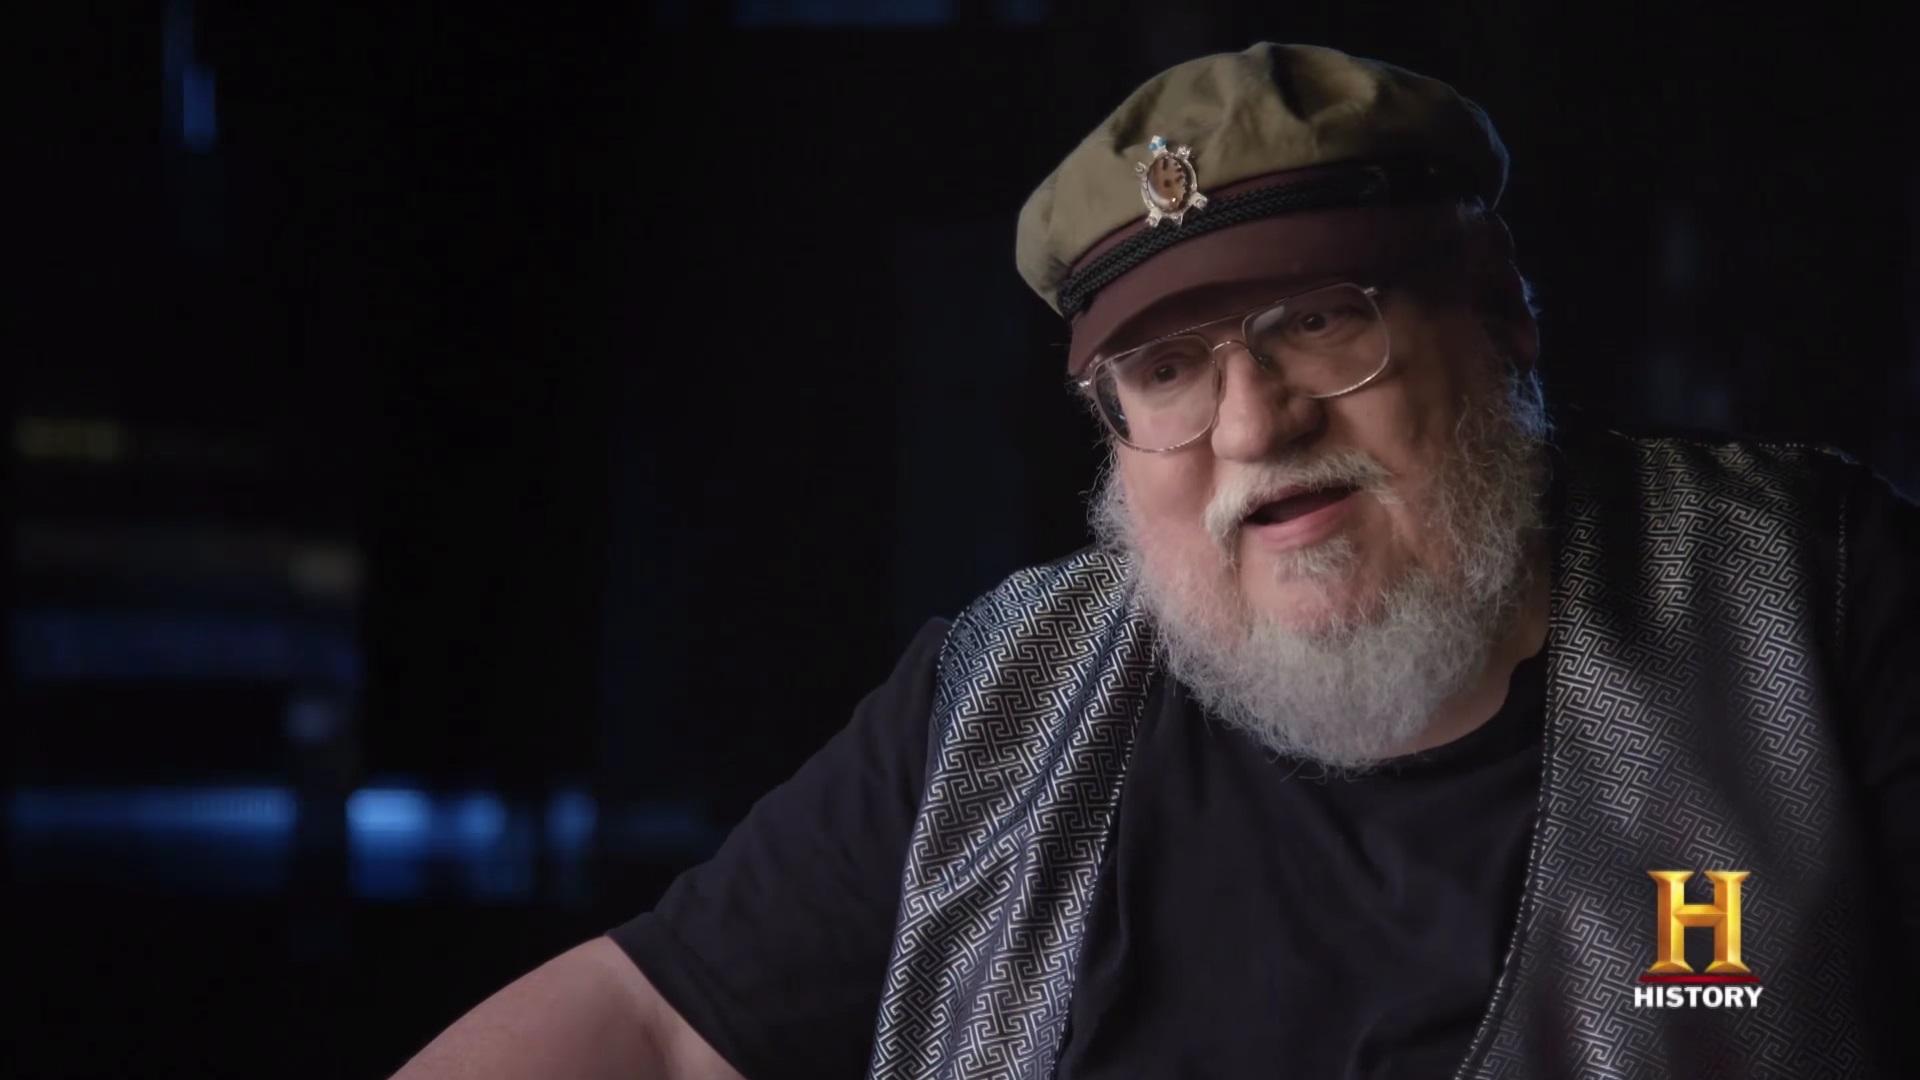 George R.R. Martin Talks About His First Comic Con Experience